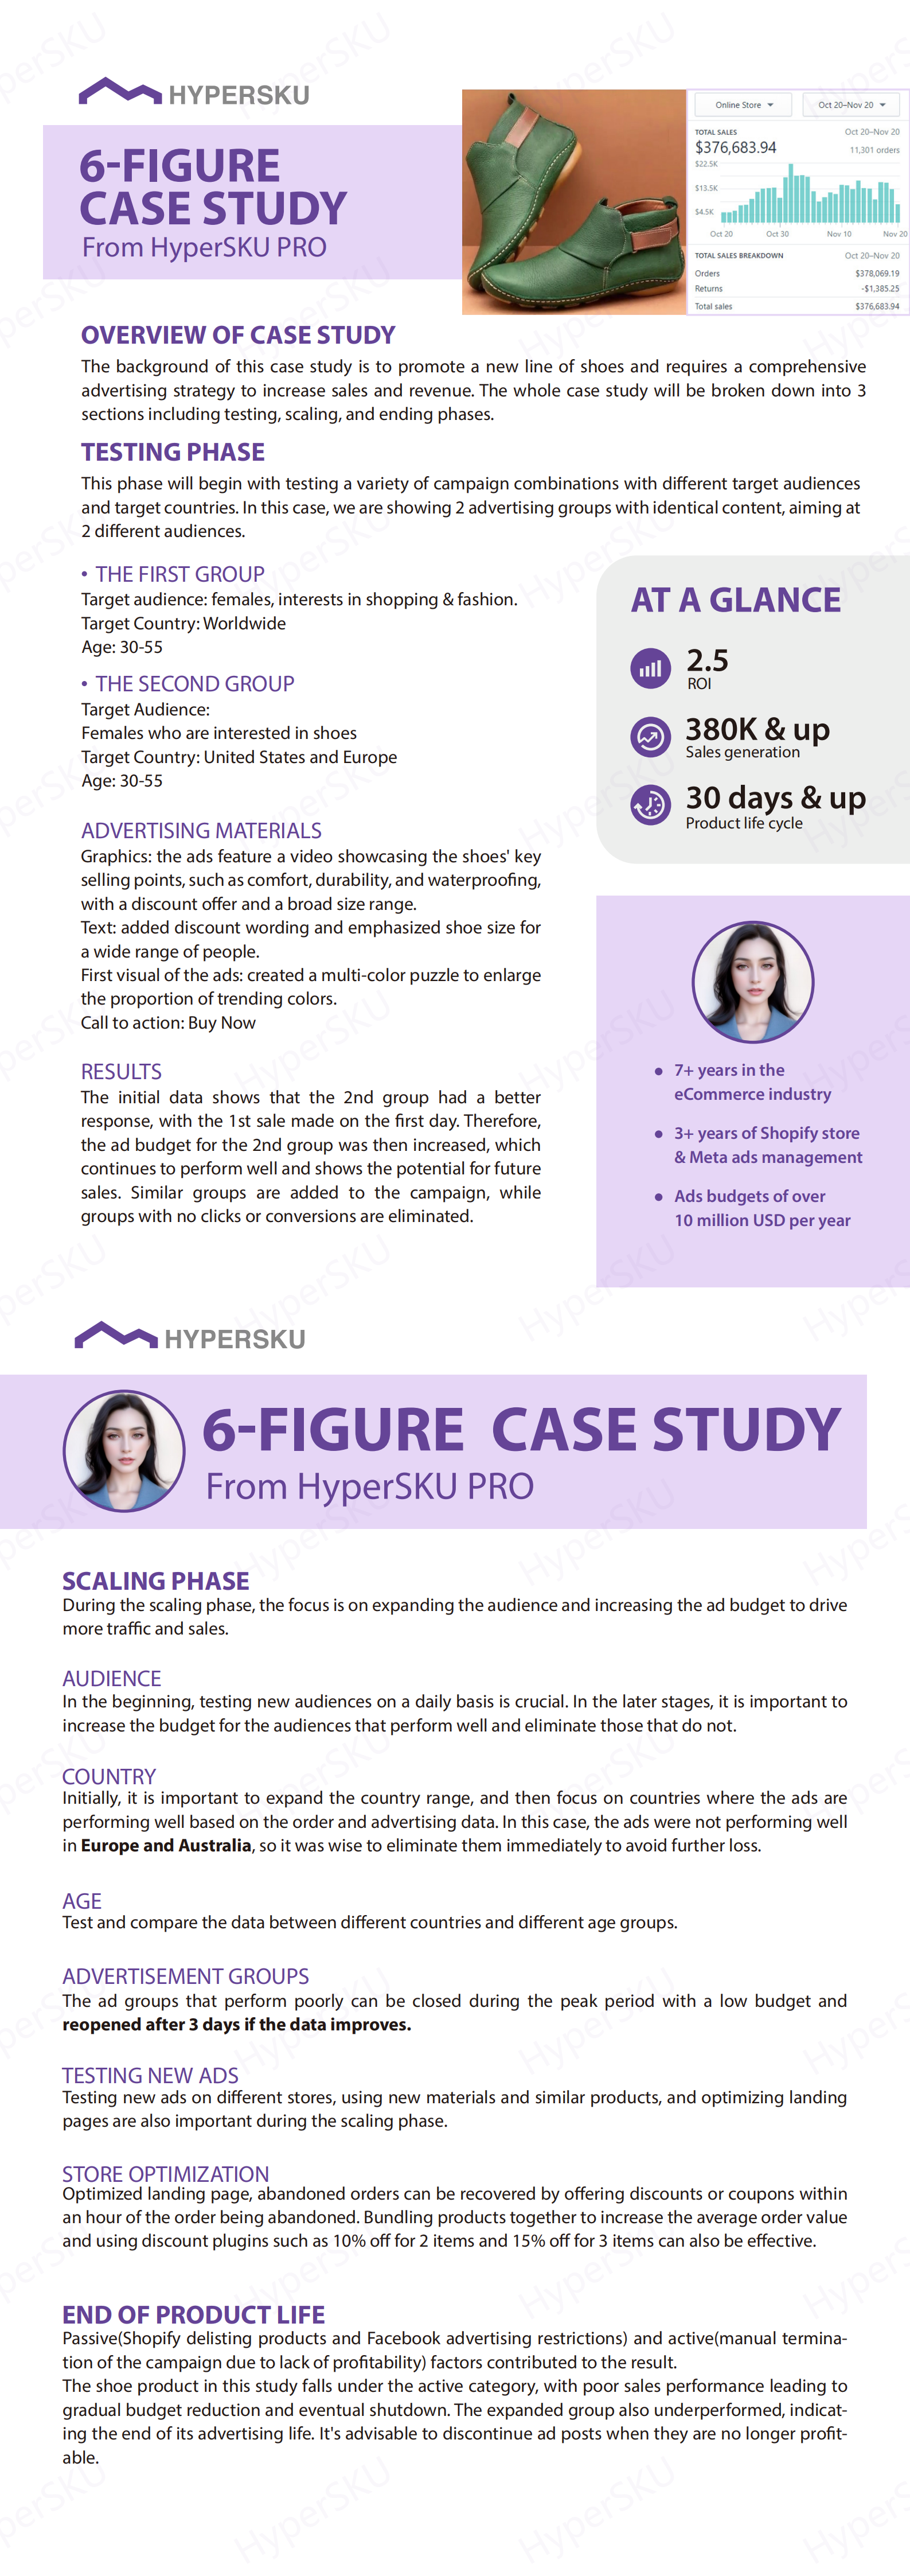 Dropshipping Case Study from HyperSKU